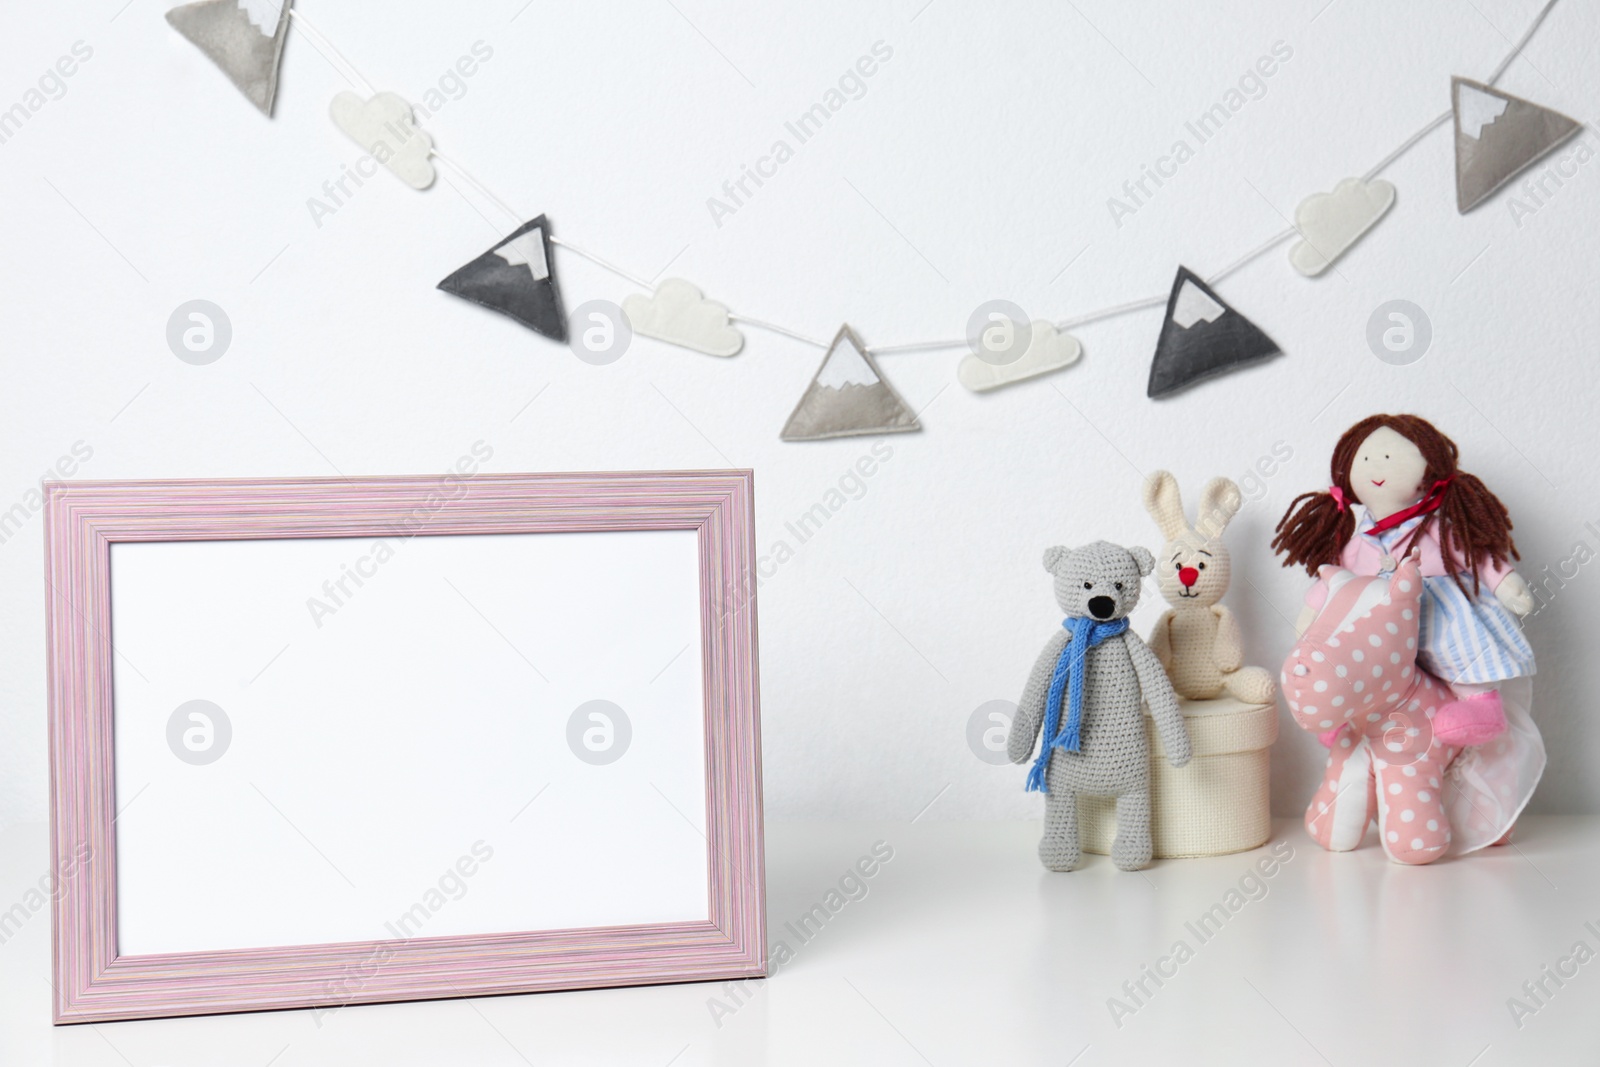 Photo of Soft toys and photo frame on table against white background, space for text. Child room interior